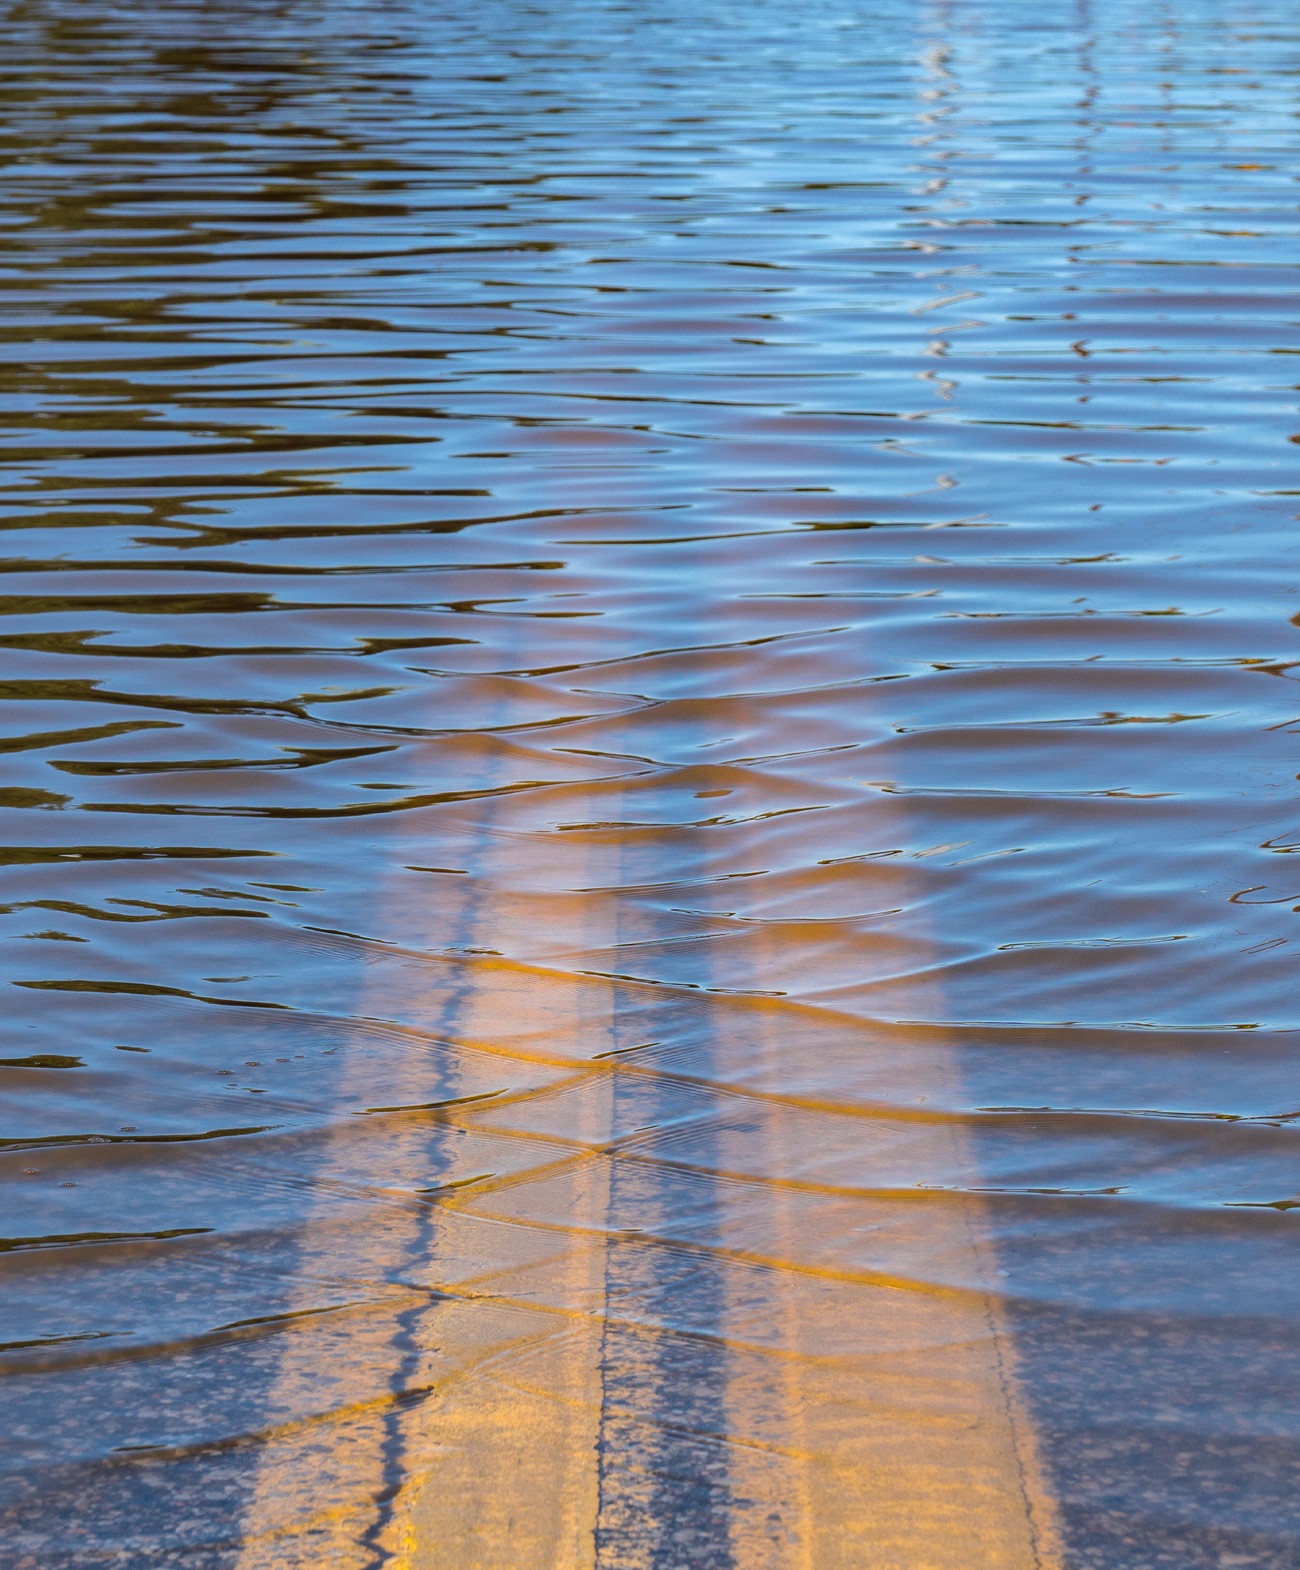 double yellow center lines of a road disappearing into deep water